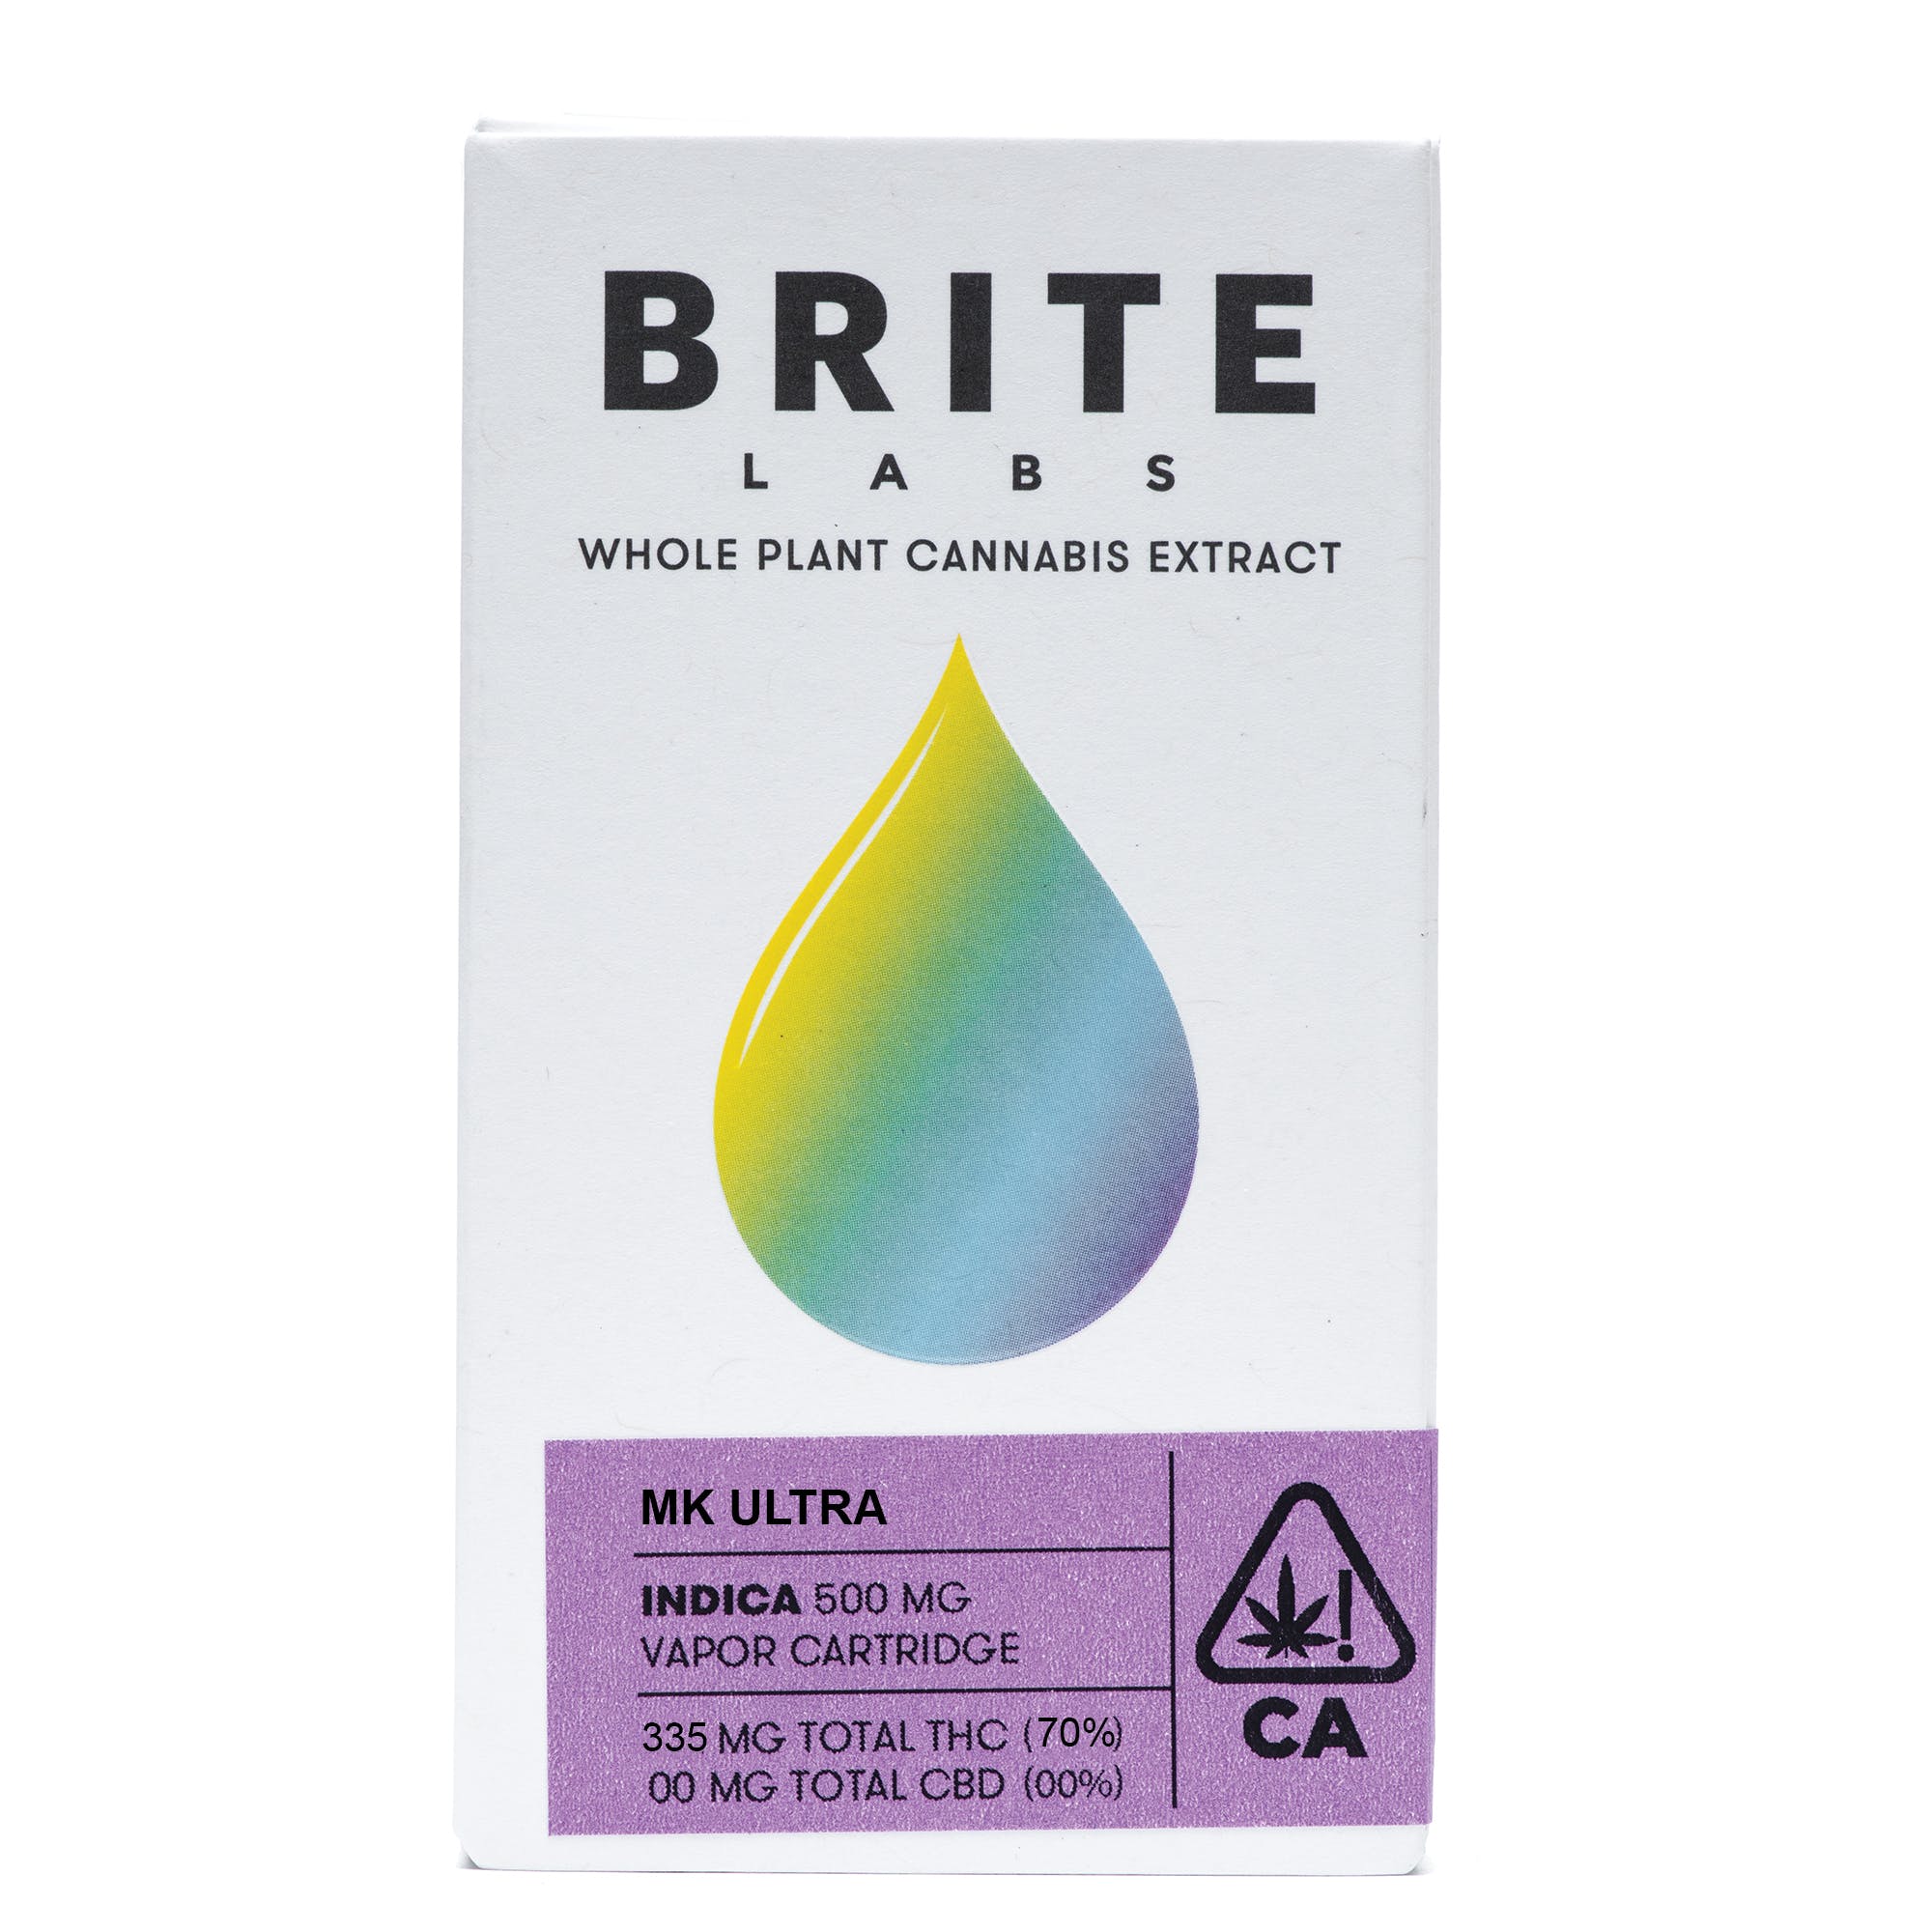 *Medical/Online(21+)* MK Ultra - Brite Labs C-Cell Cartridge by Foxworthy Farms